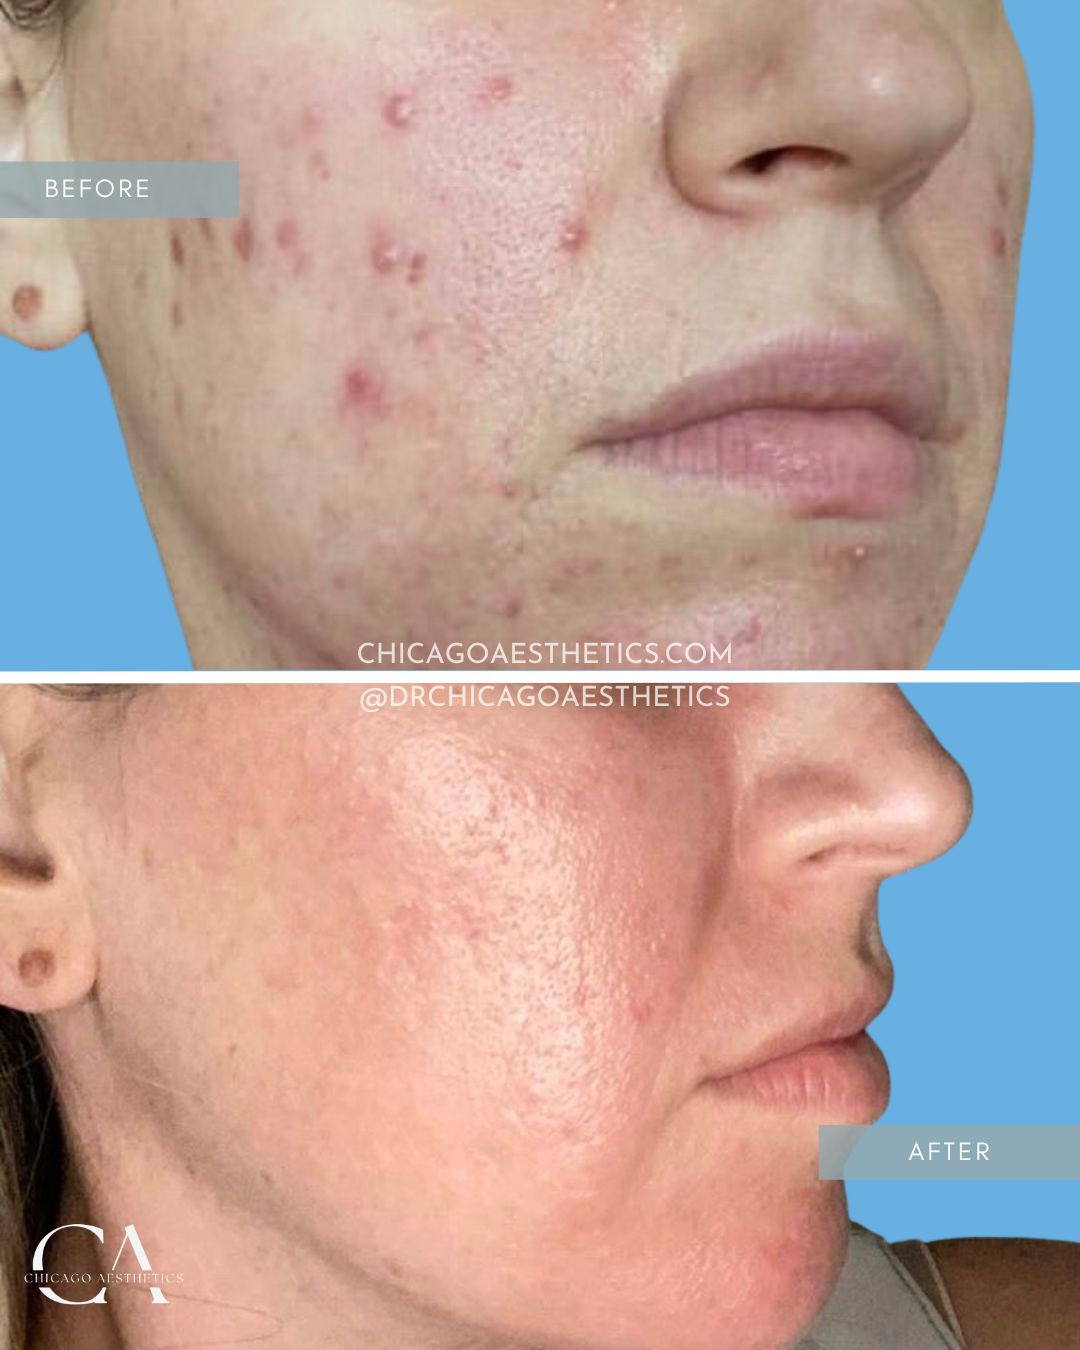 A woman's face with acne before and after MICRONEEDLING treatment, captured in Before After Photos.